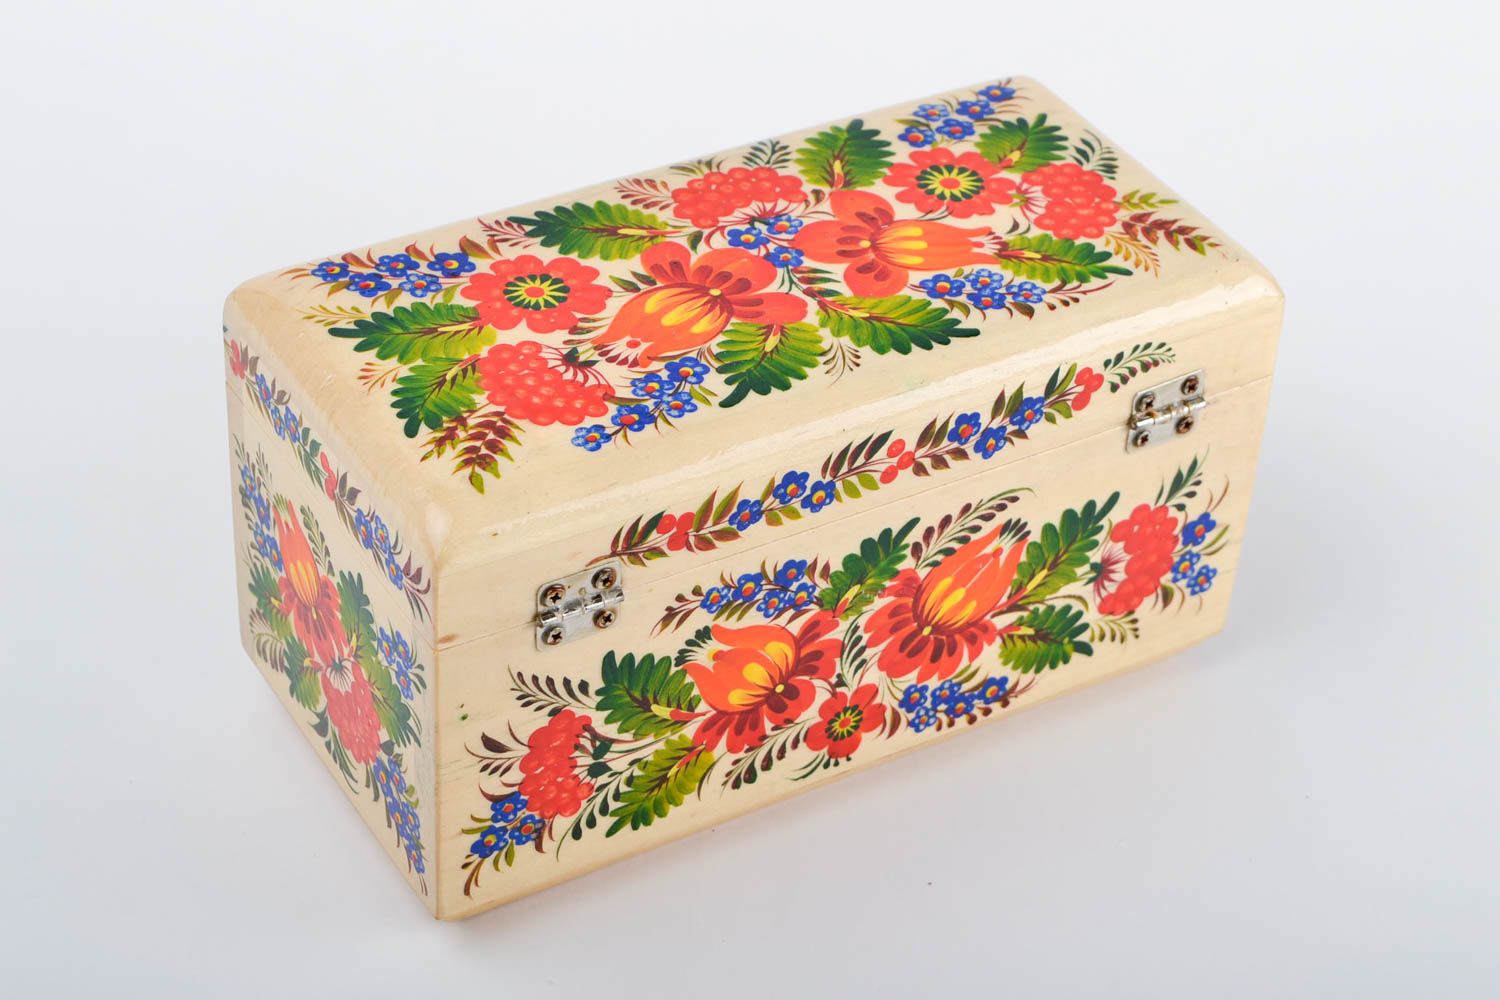 Handmade wooden jewelry box jewelry organizer folk arts and crafts gifts for her photo 5